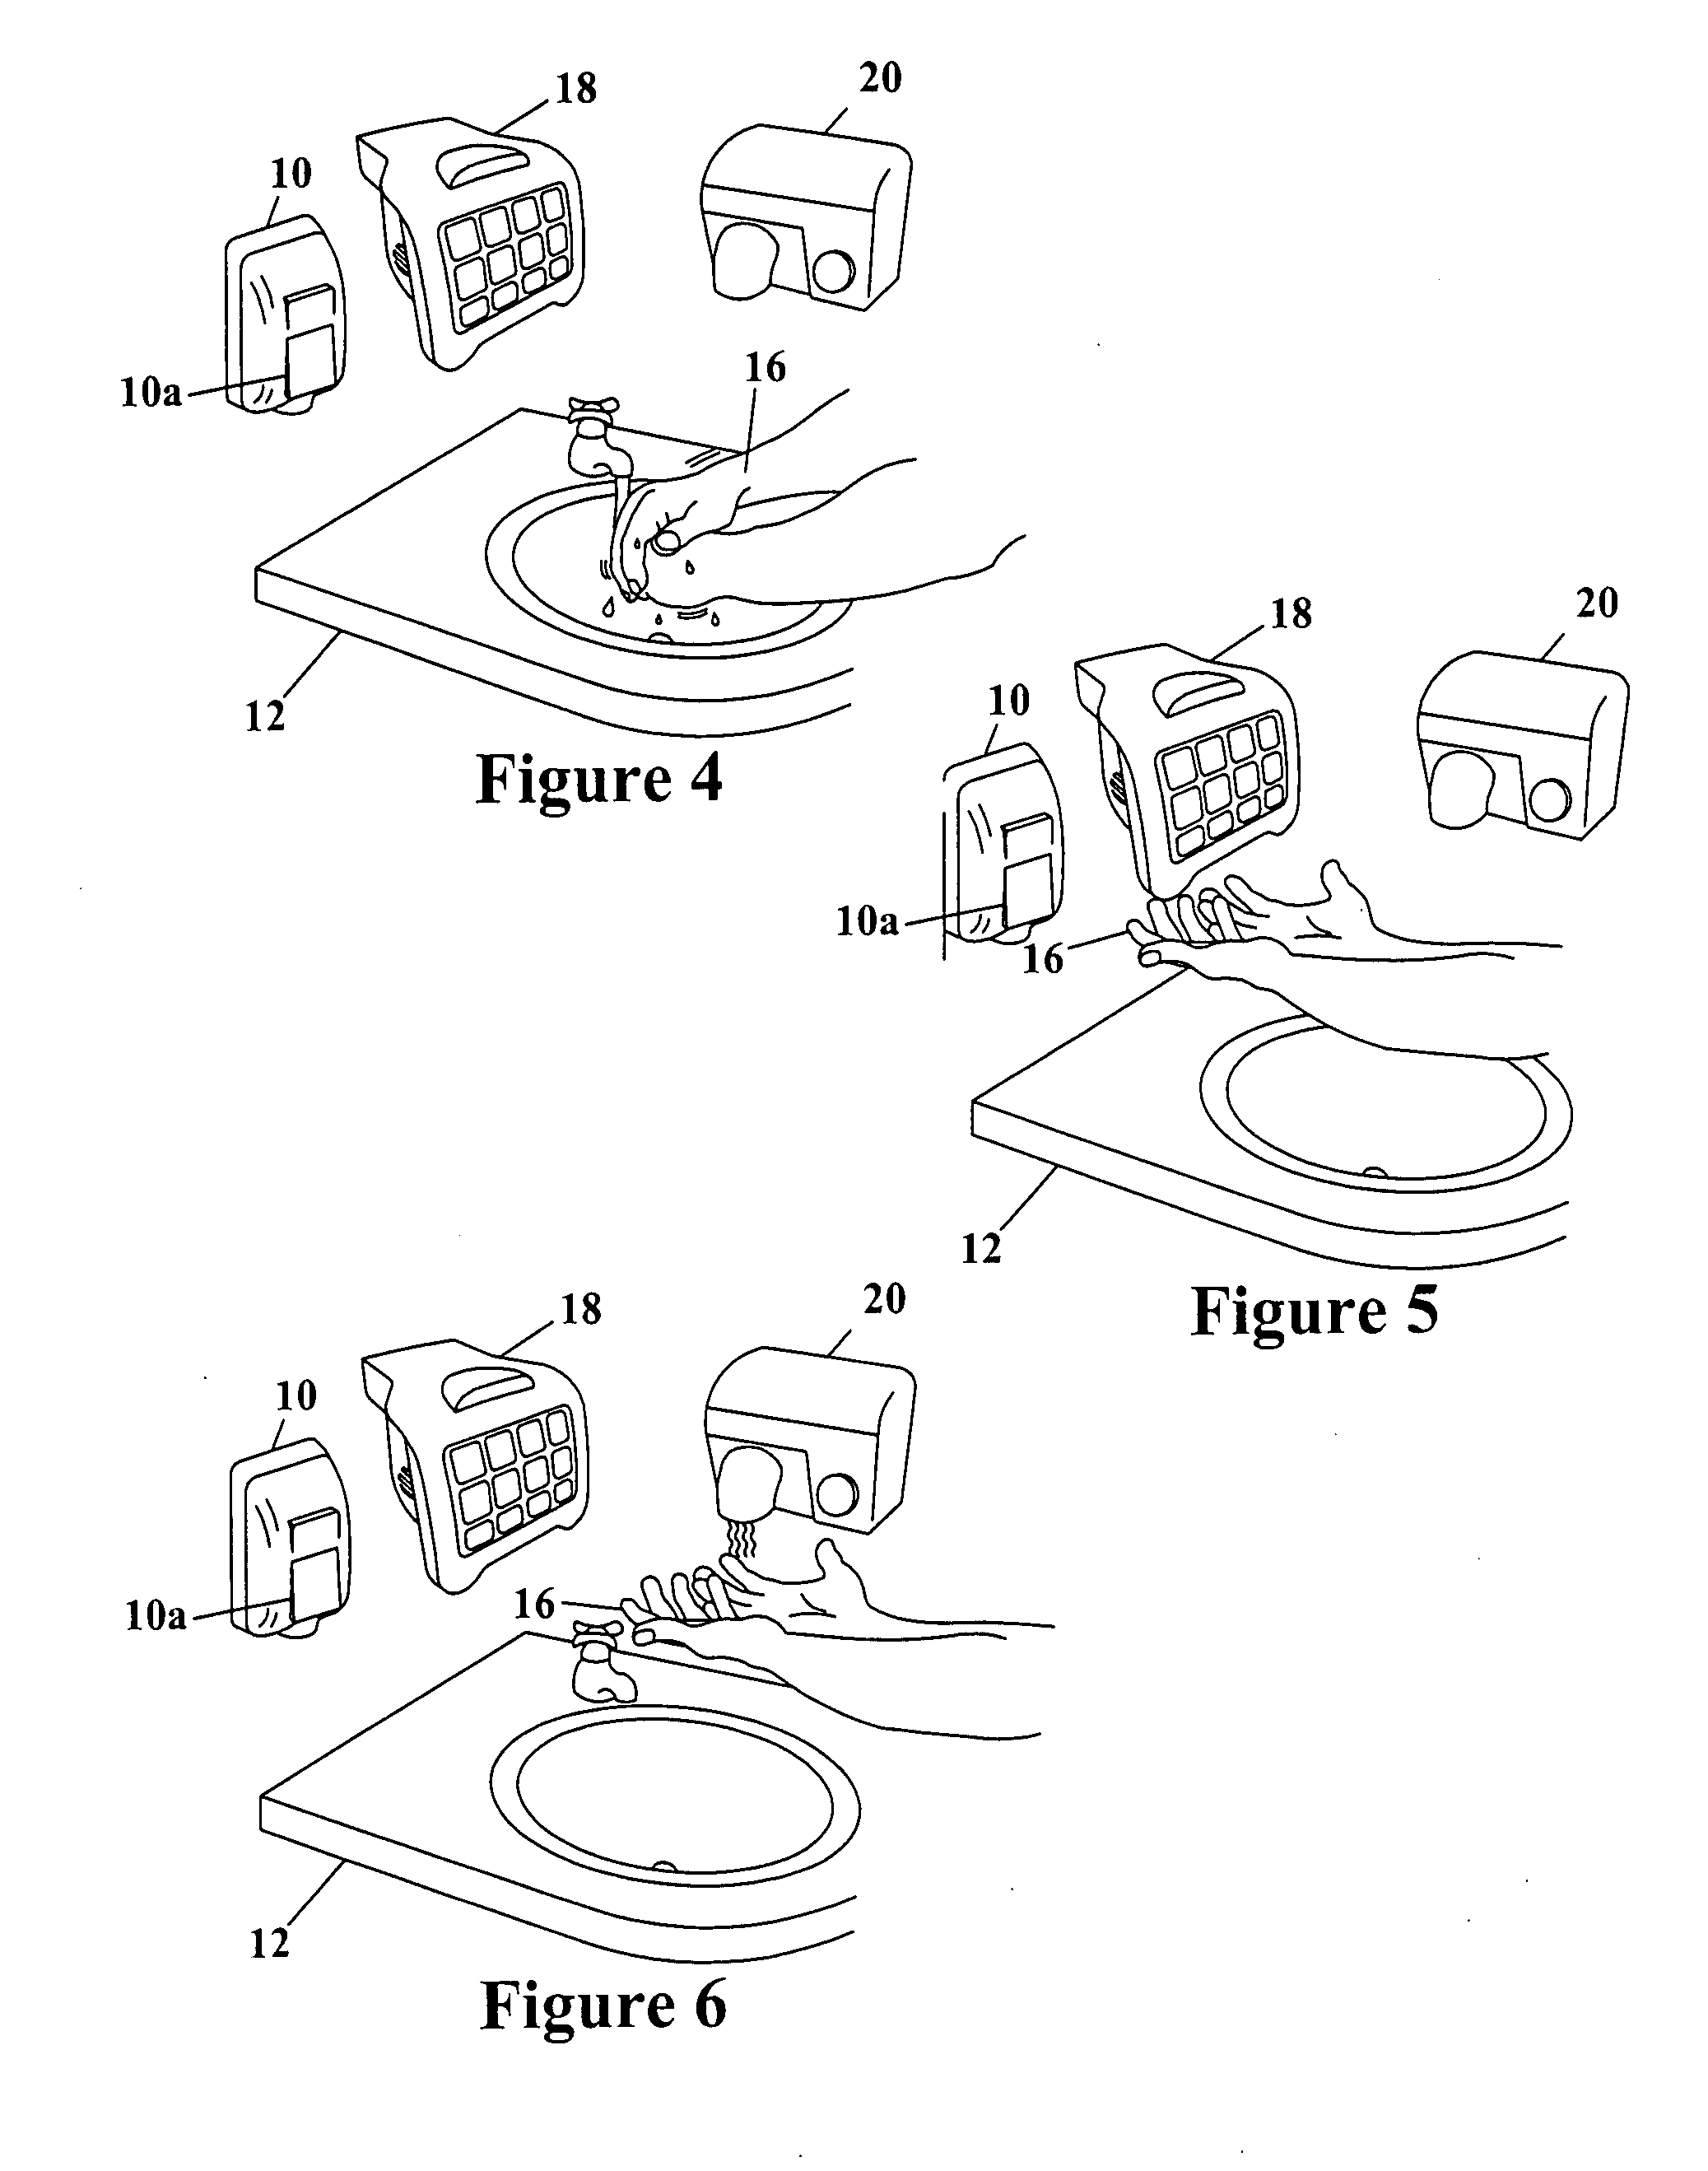 Hand hygiene verification/tracking system and method